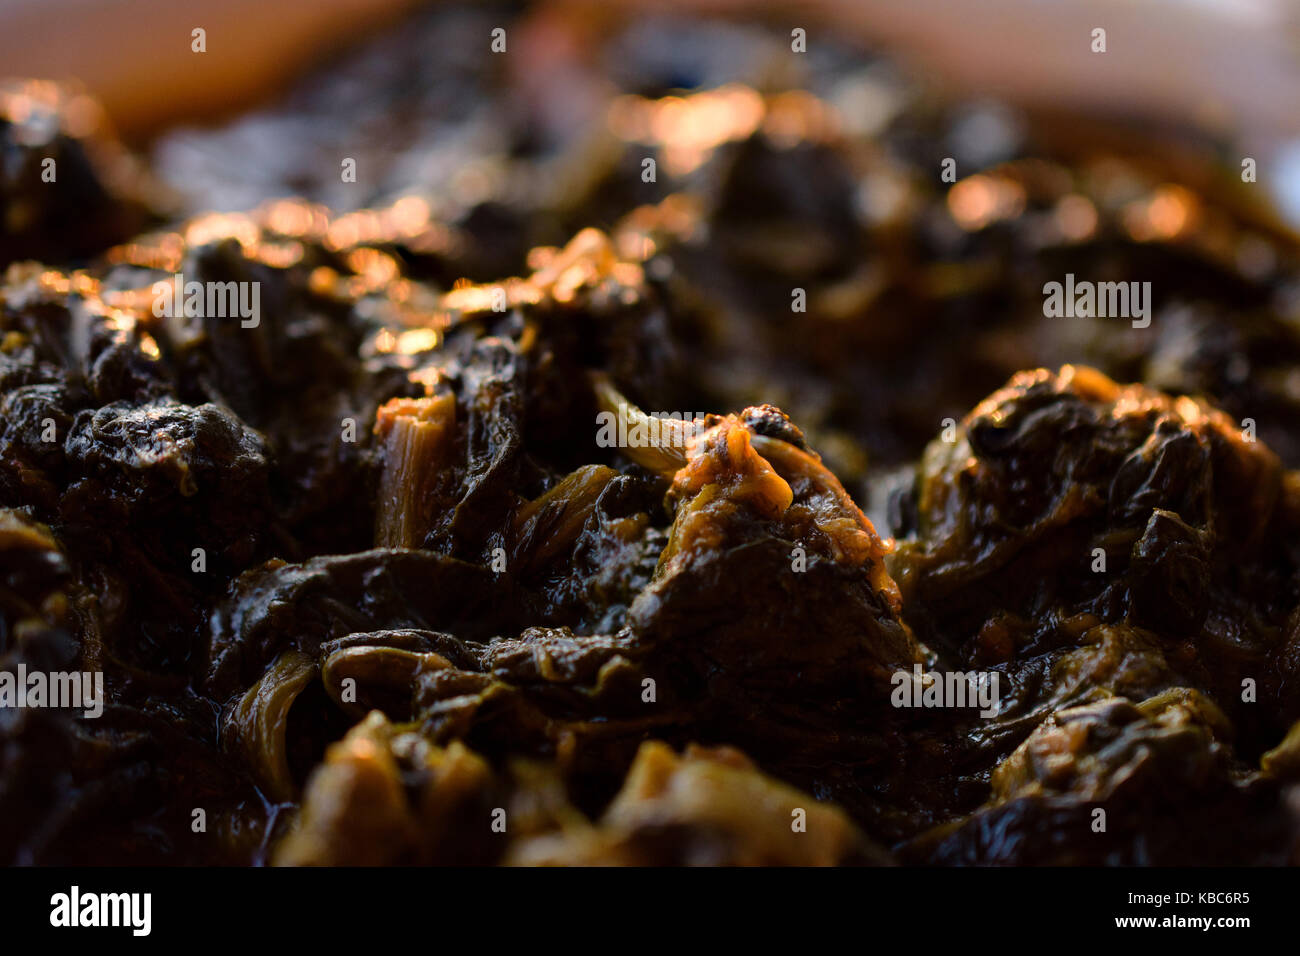 Delicious Greek Spinach And Meat Stew During Sunset Stock Photo